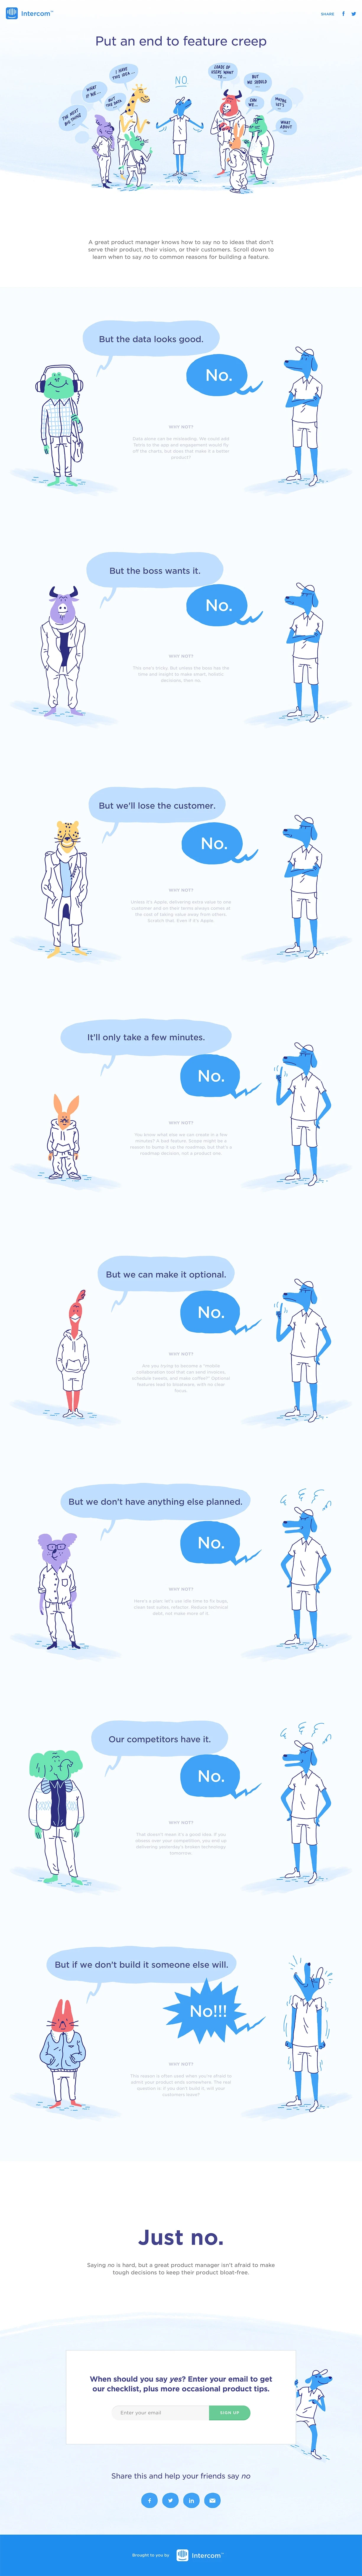 Intercom Landing Page Example: A great product manager knows how to say no to ideas that don’t serve their vision. See 8 tempting reasons to build a feature, and why you should just say no.